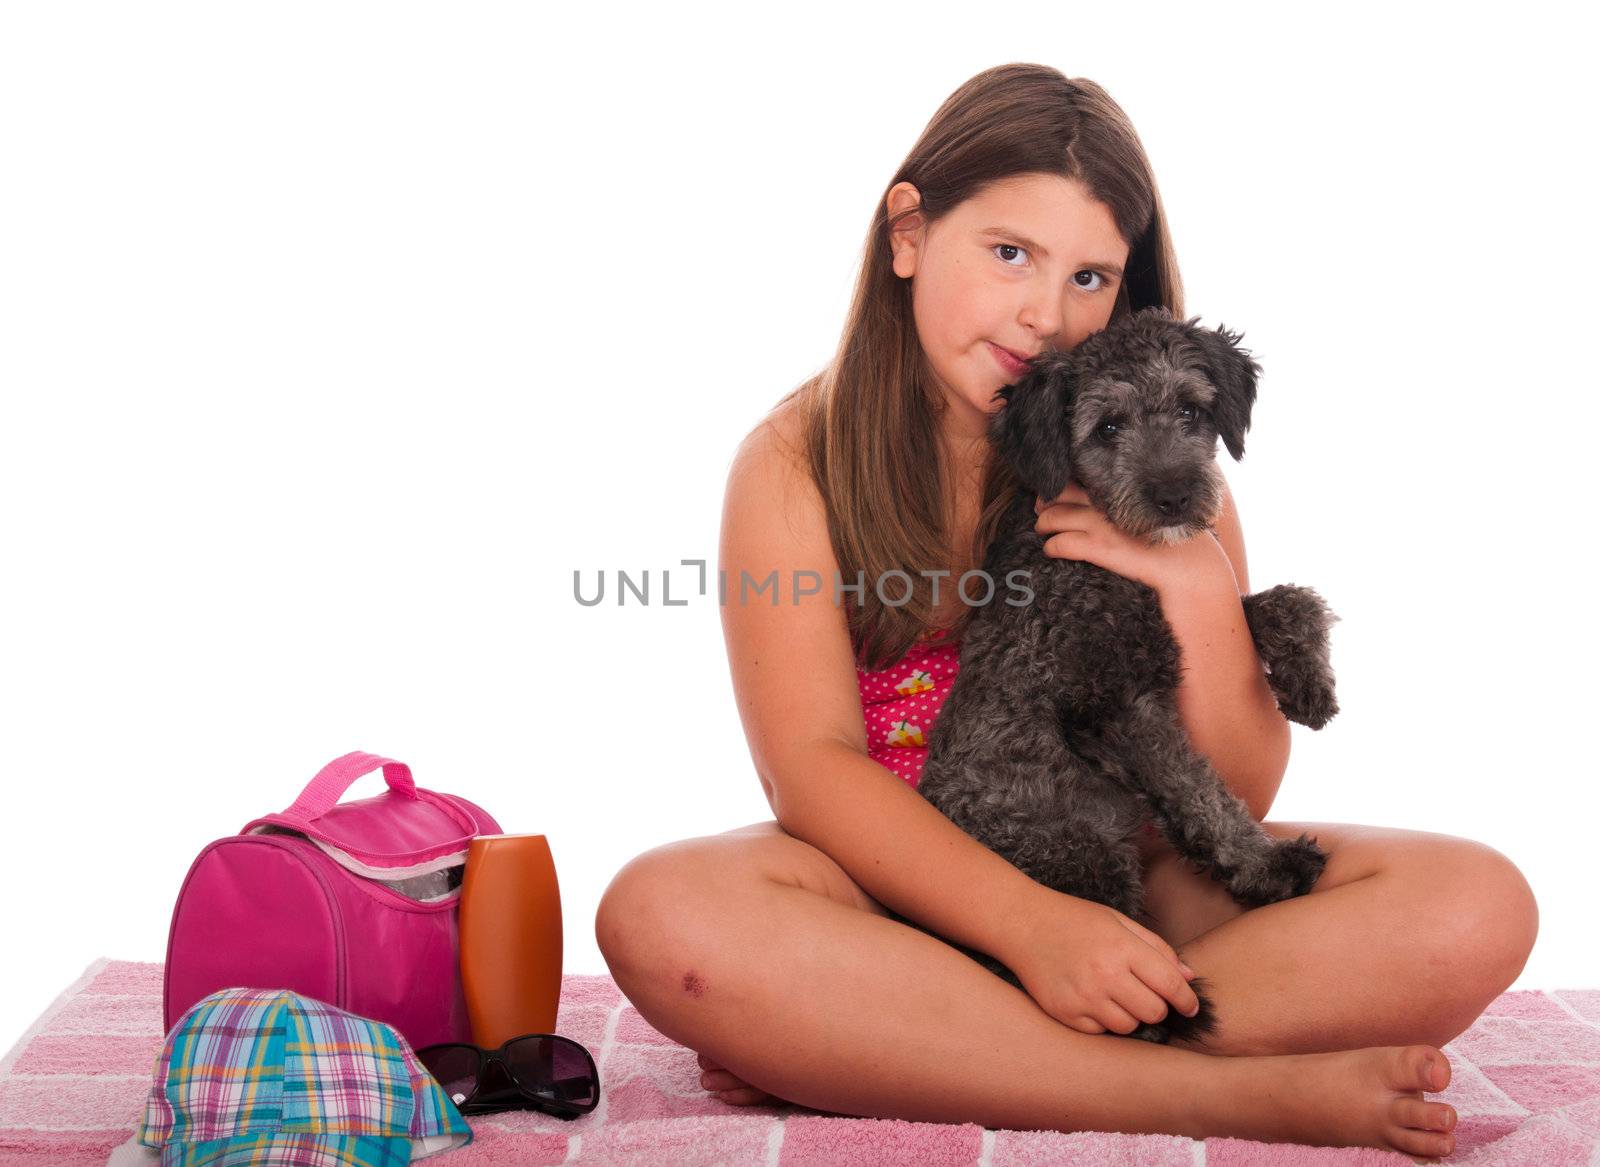 beautiful brunette teenage girl in swimsuit at the beach with her shipoo dog (studio setting with beach and personal items) isolated on white background